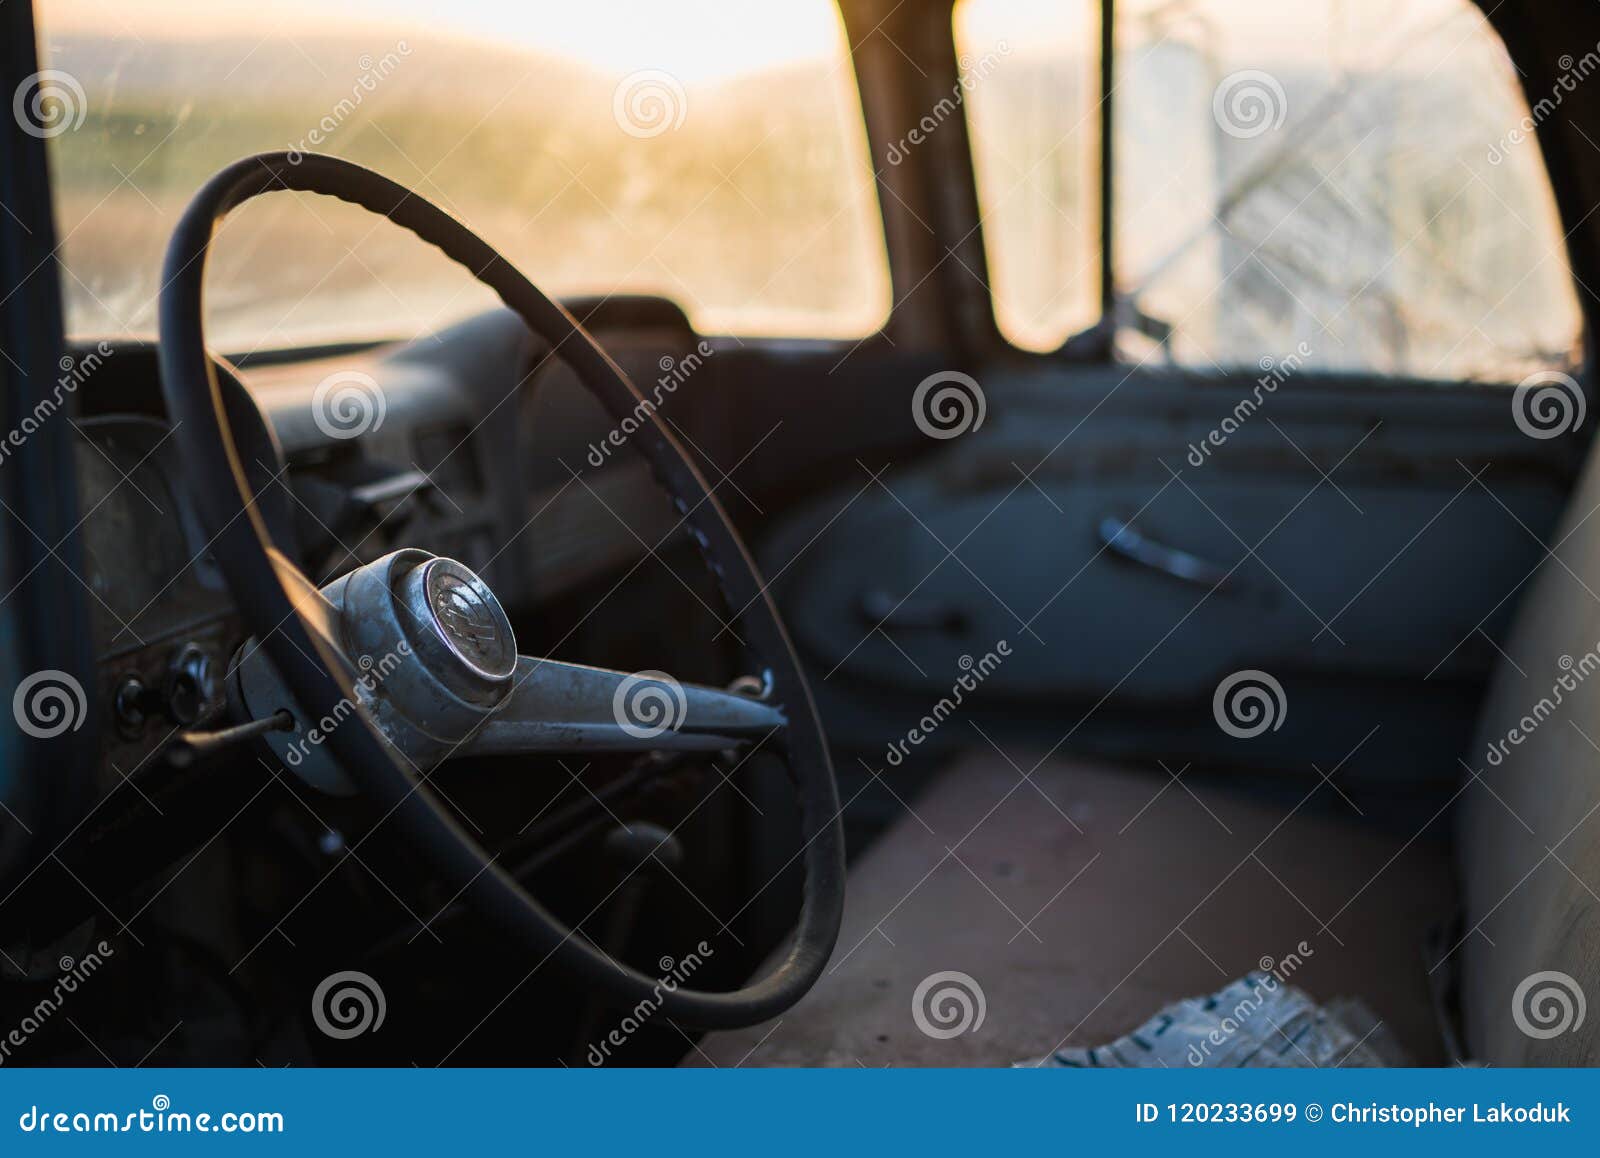 Old Truck Interior At Sunset Editorial Stock Image Image